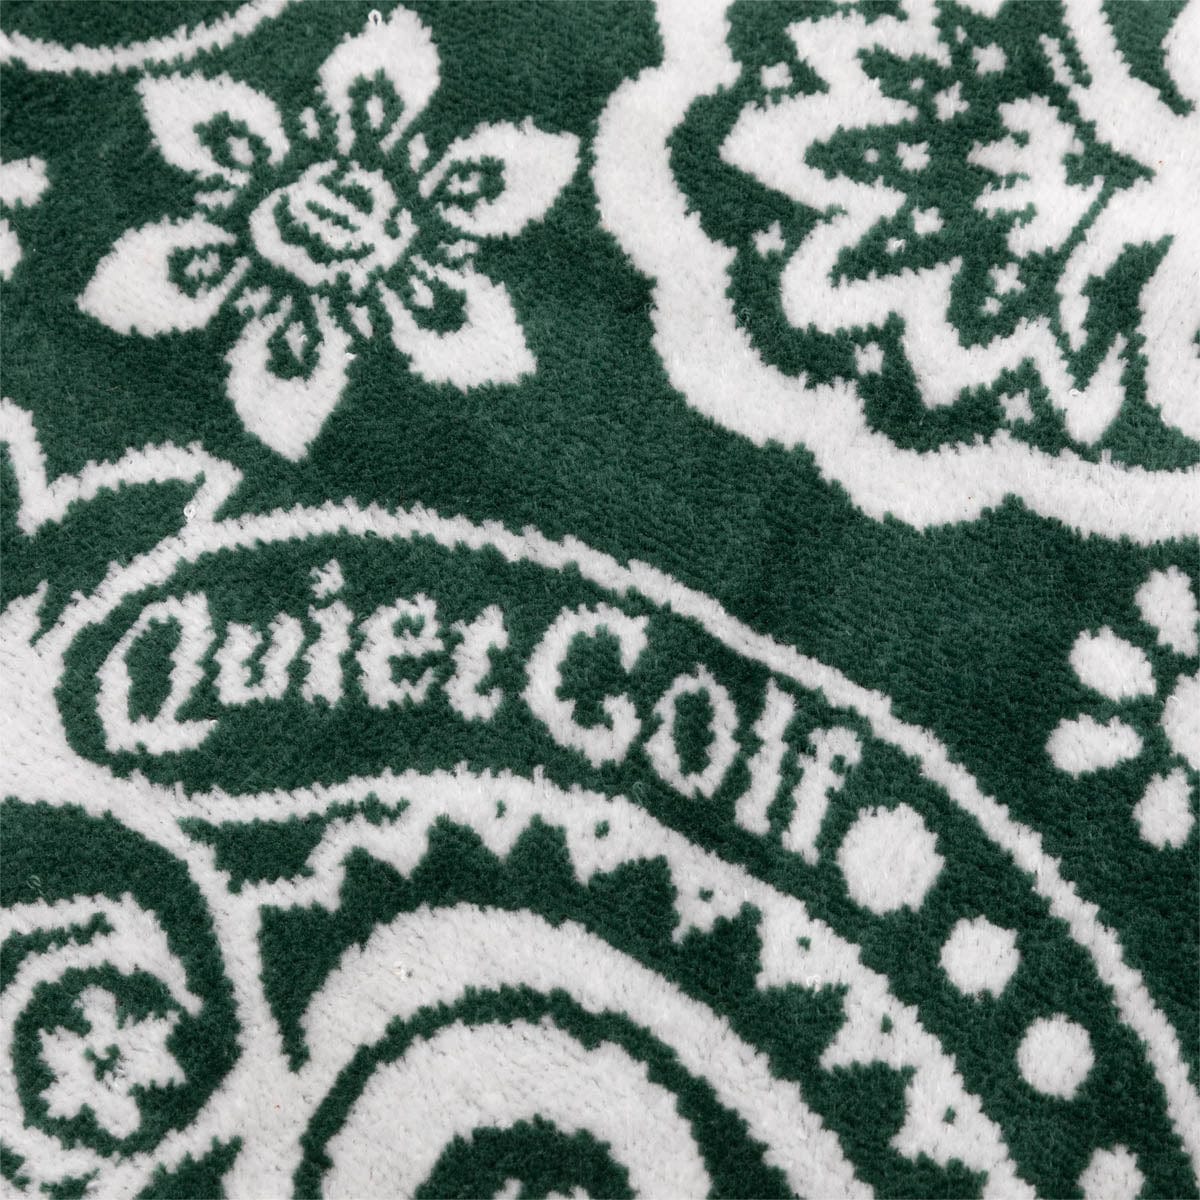 Quiet Golf Odds & Ends FOREST / O/S PAISLEY GOLF TOWEL